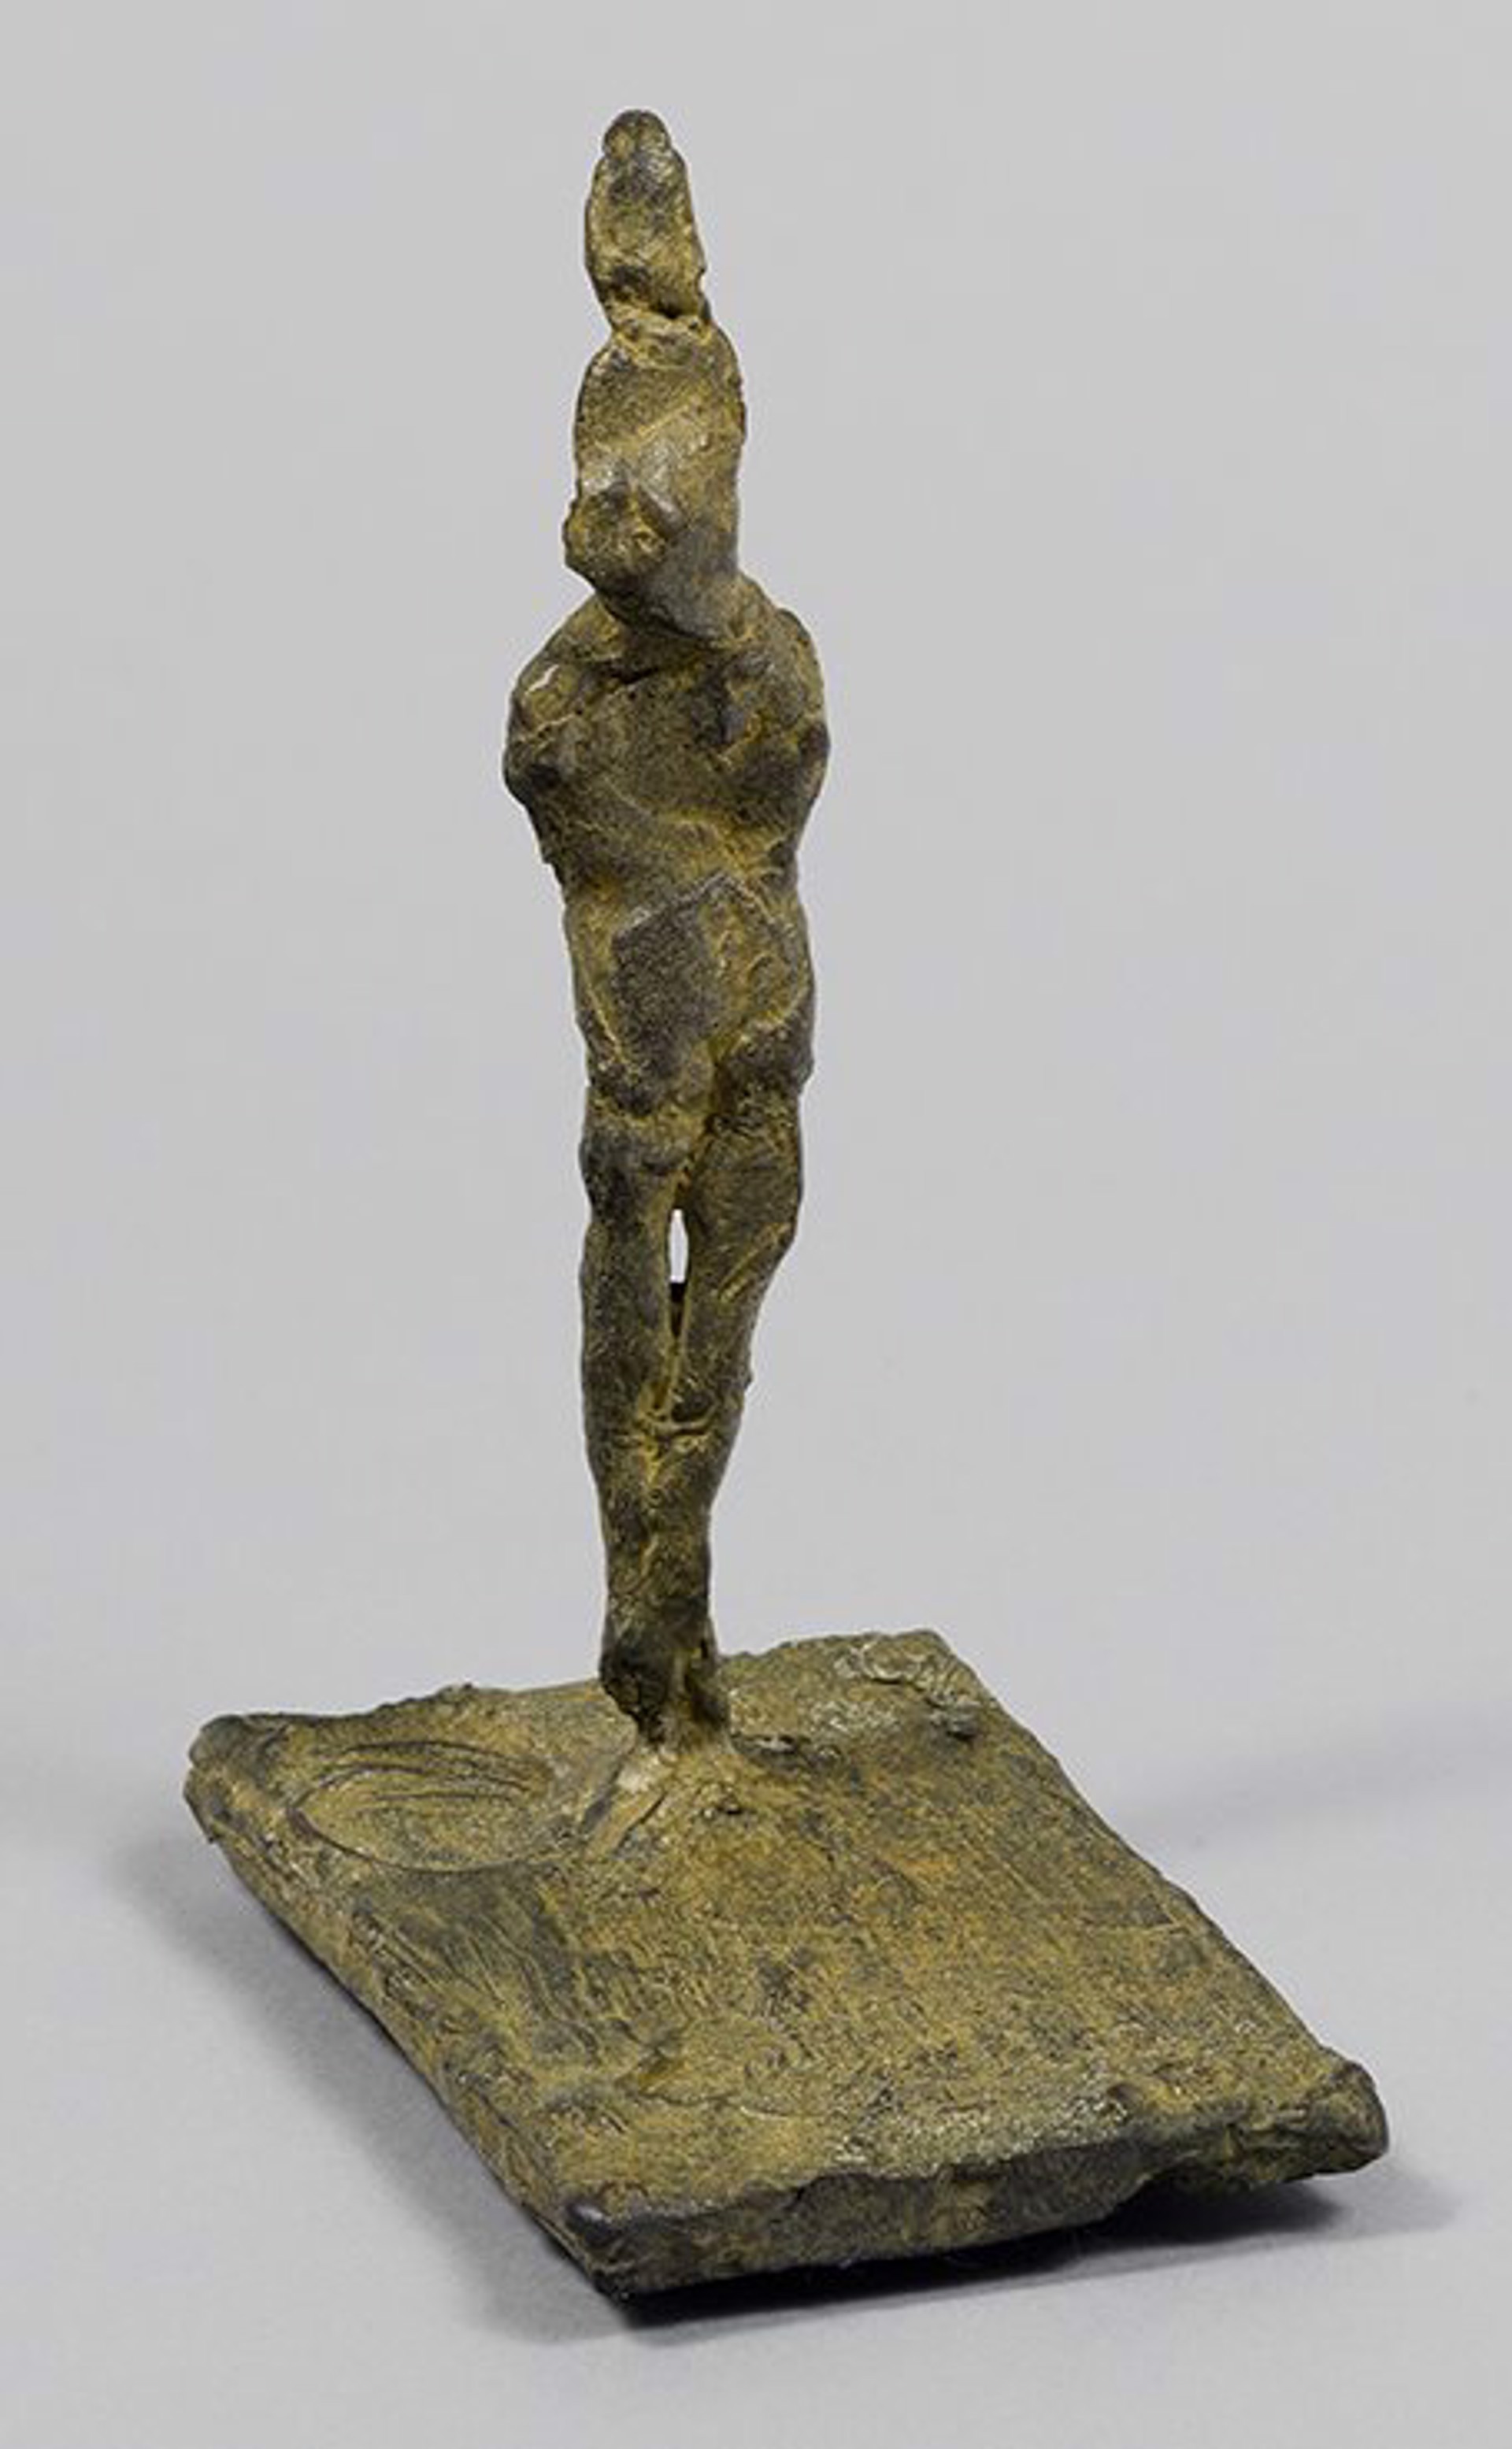 Small Figure (Ed. 24/25, Maquette) by Nathan Oliveira